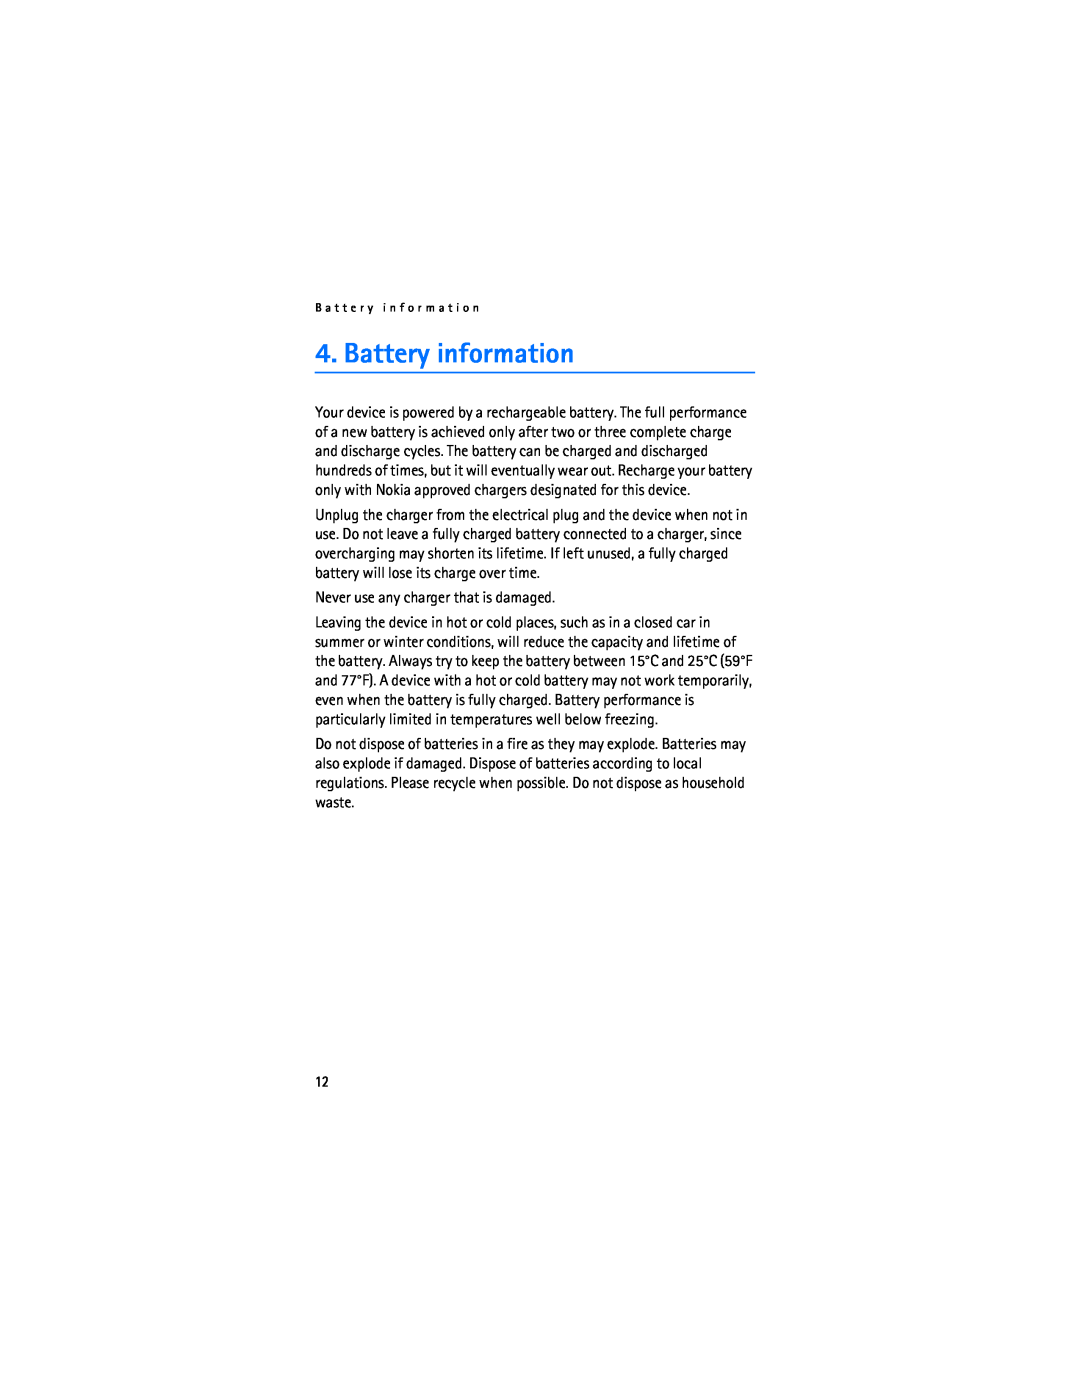 Nokia BH-900 manual Battery information, Never use any charger that is damaged 